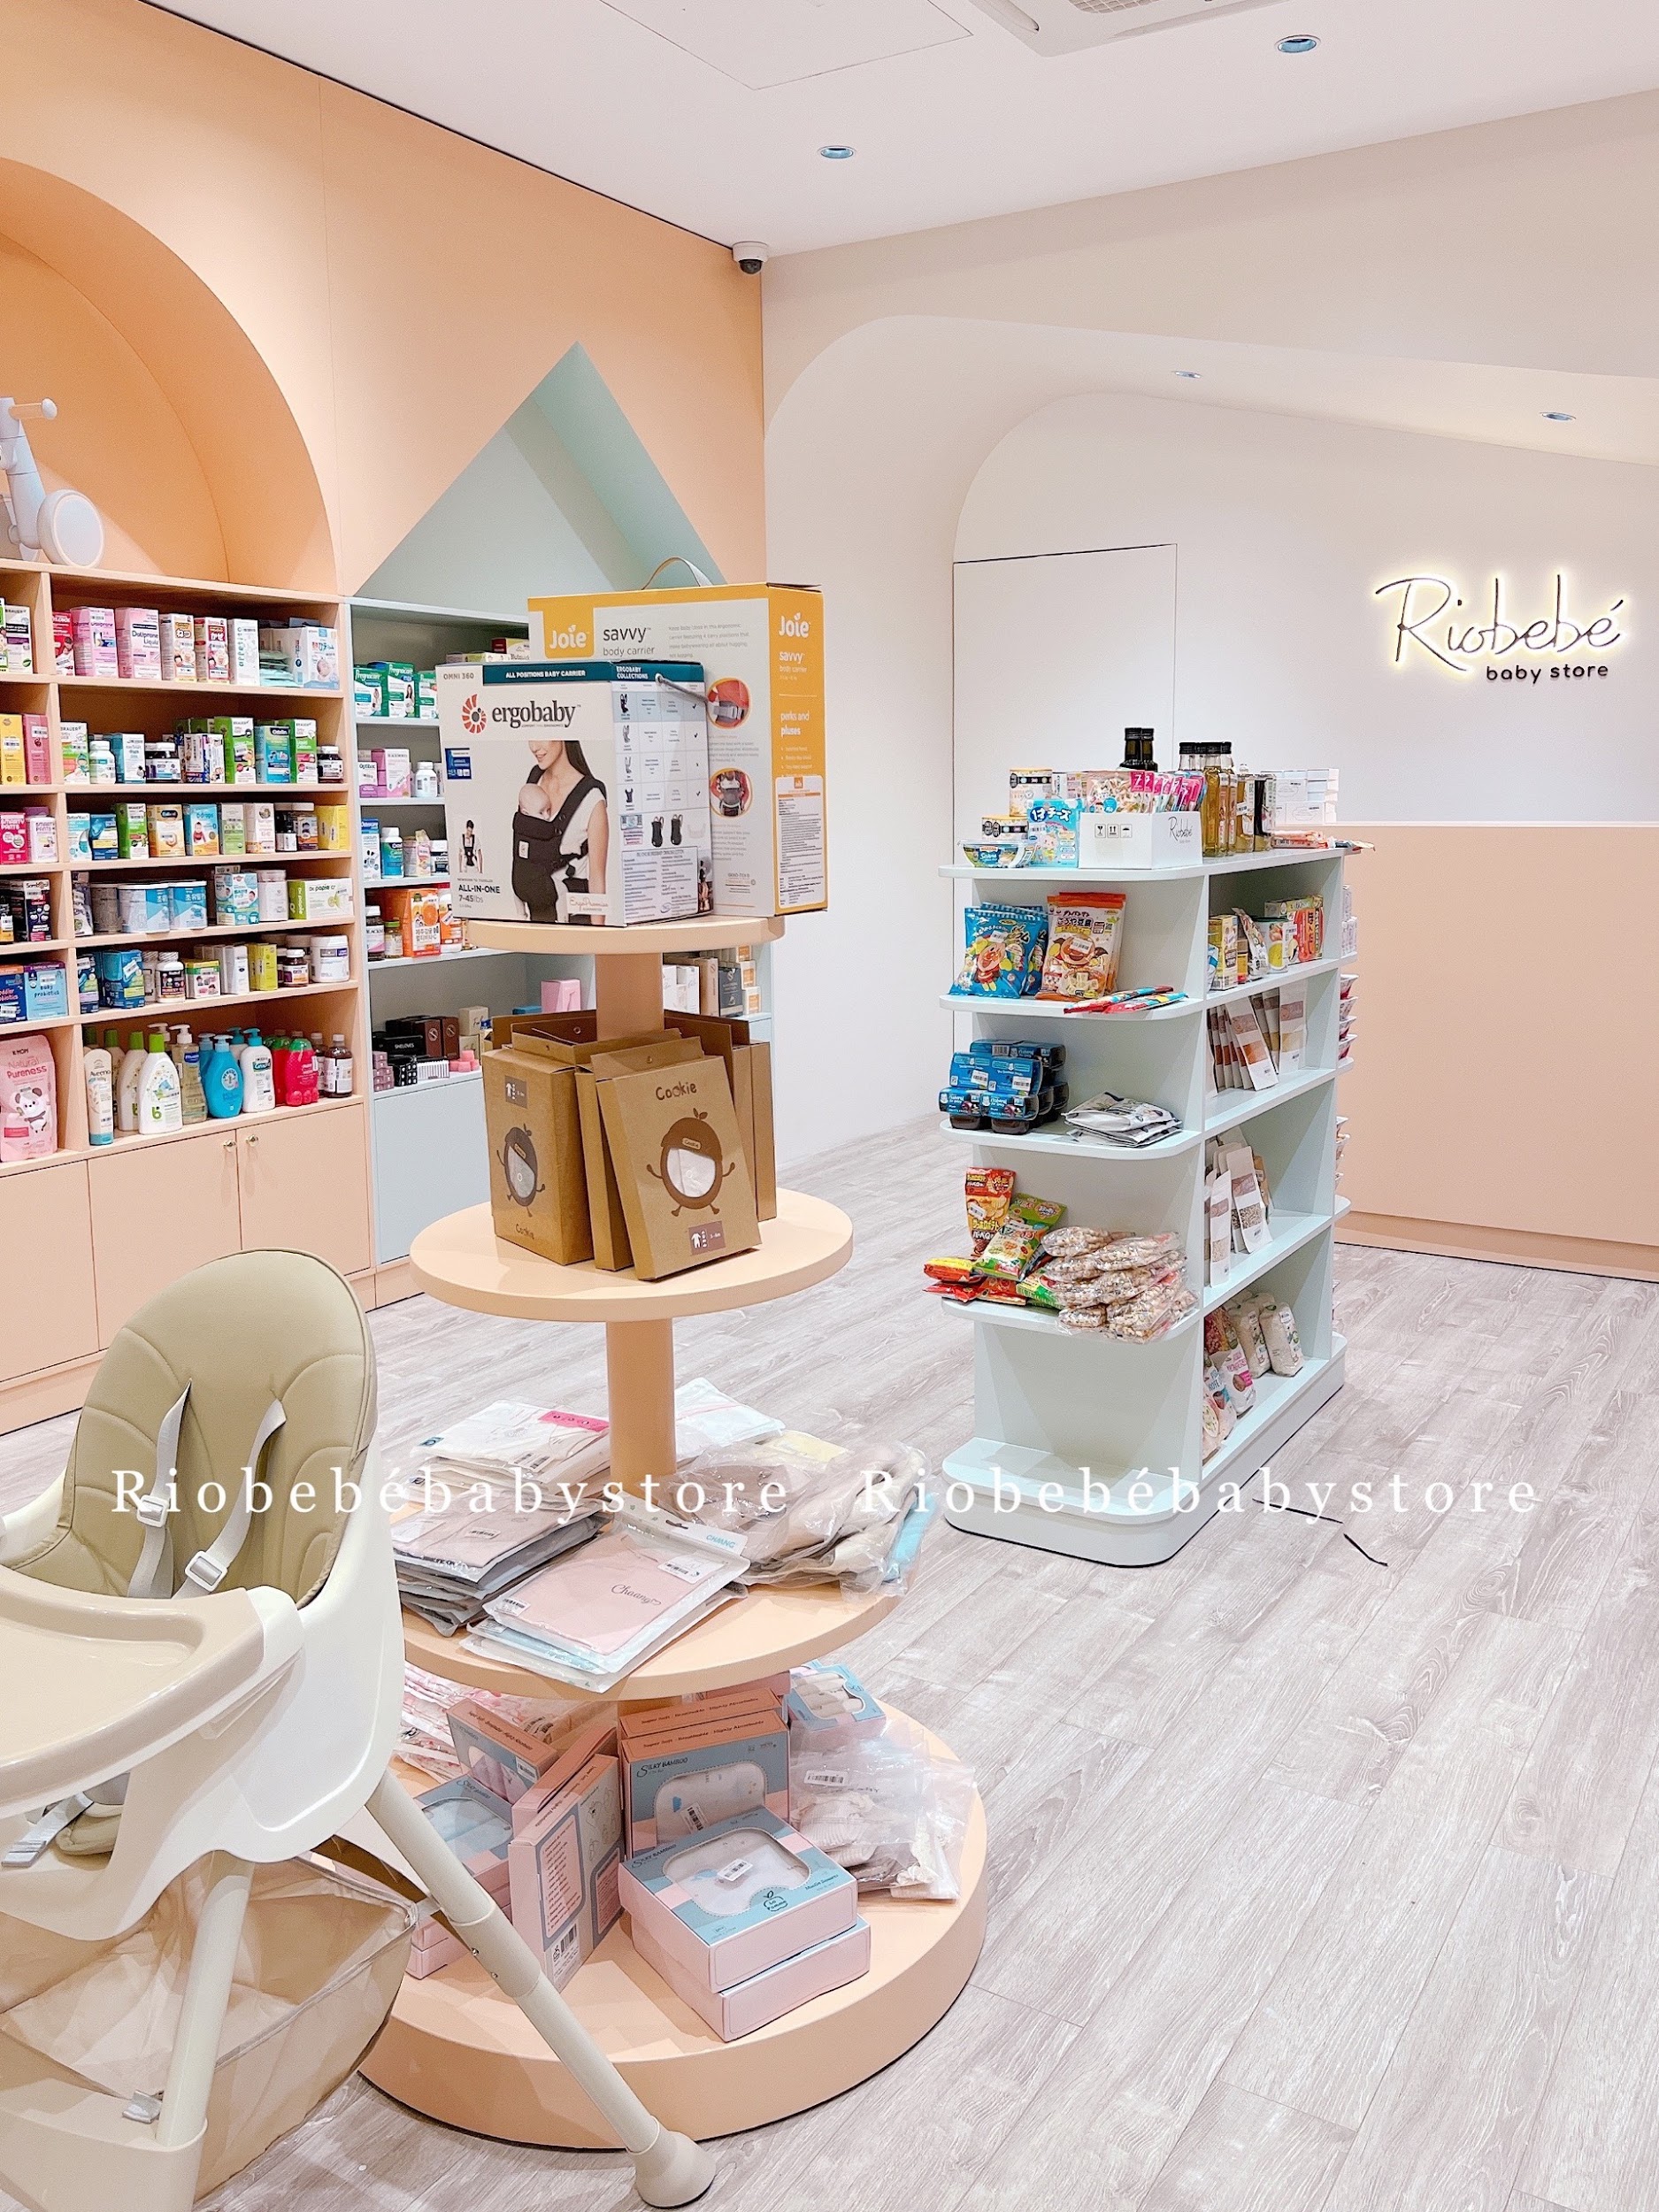 Riobebé Baby Store – A remarkable supermarket system for mothers and babies - Photo 3.